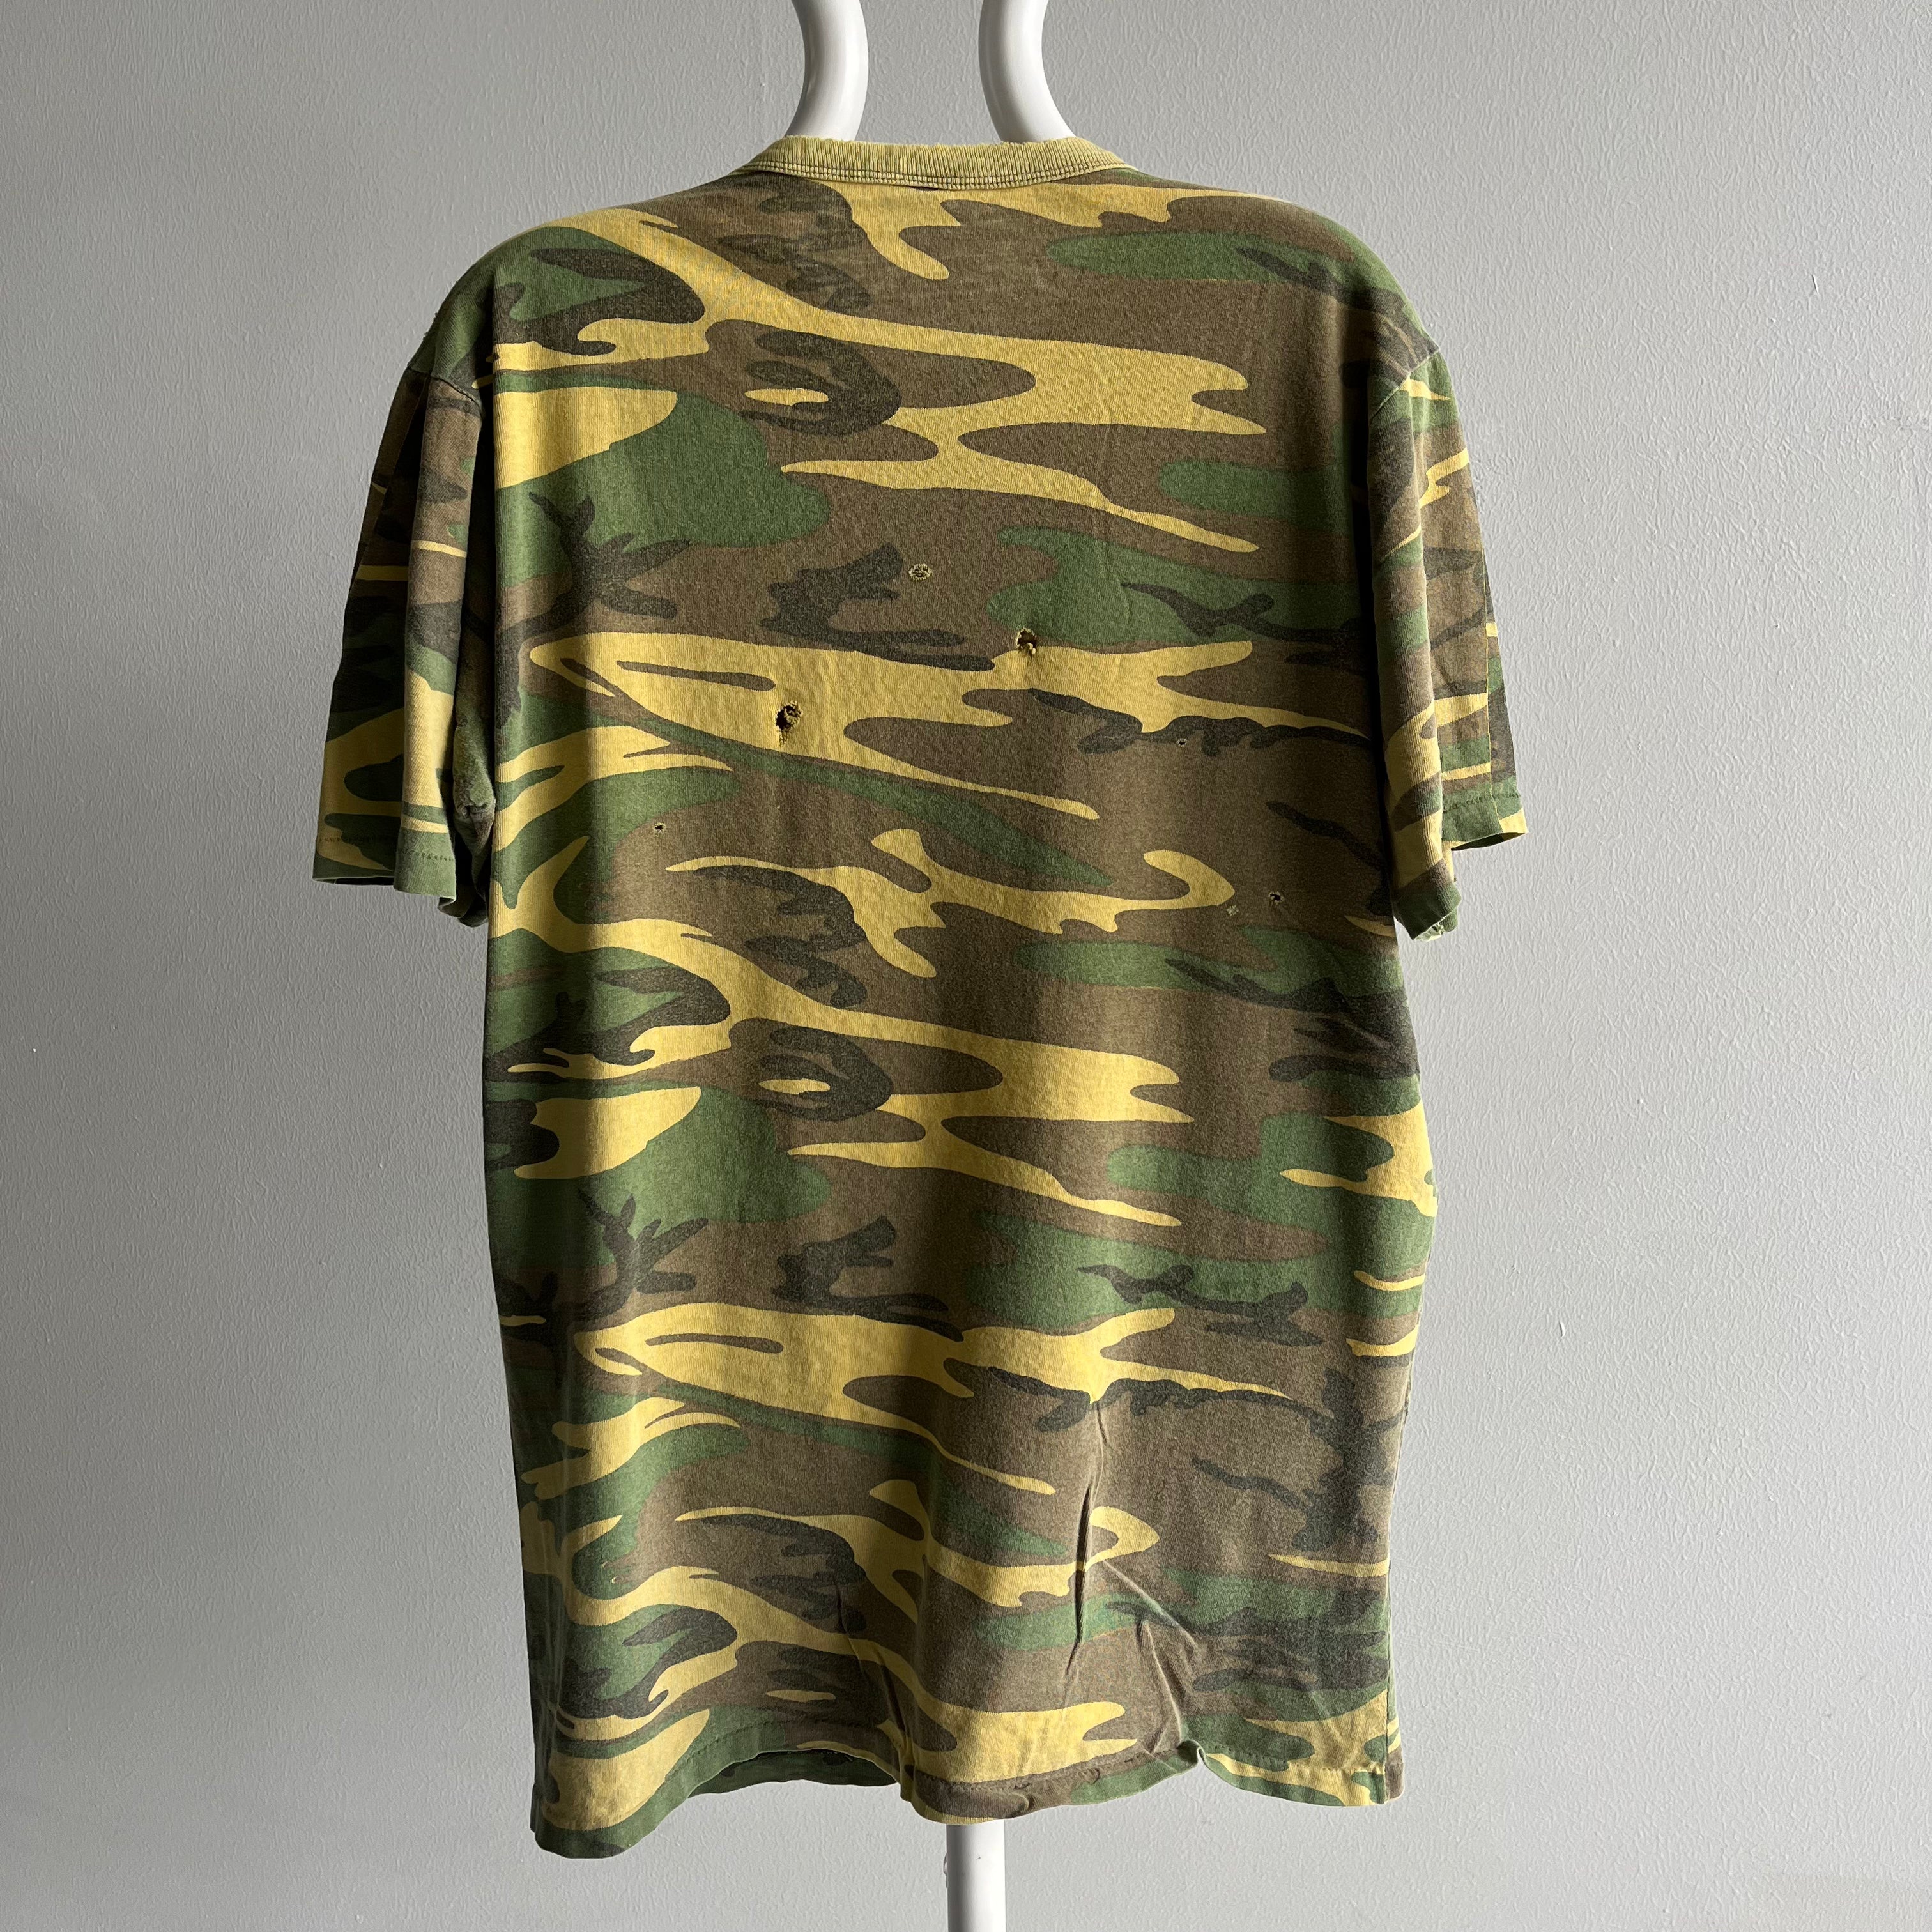 1980s Rattler's Brand Rolled Neck Epically Beat Up Cotton Camo T-Shirt